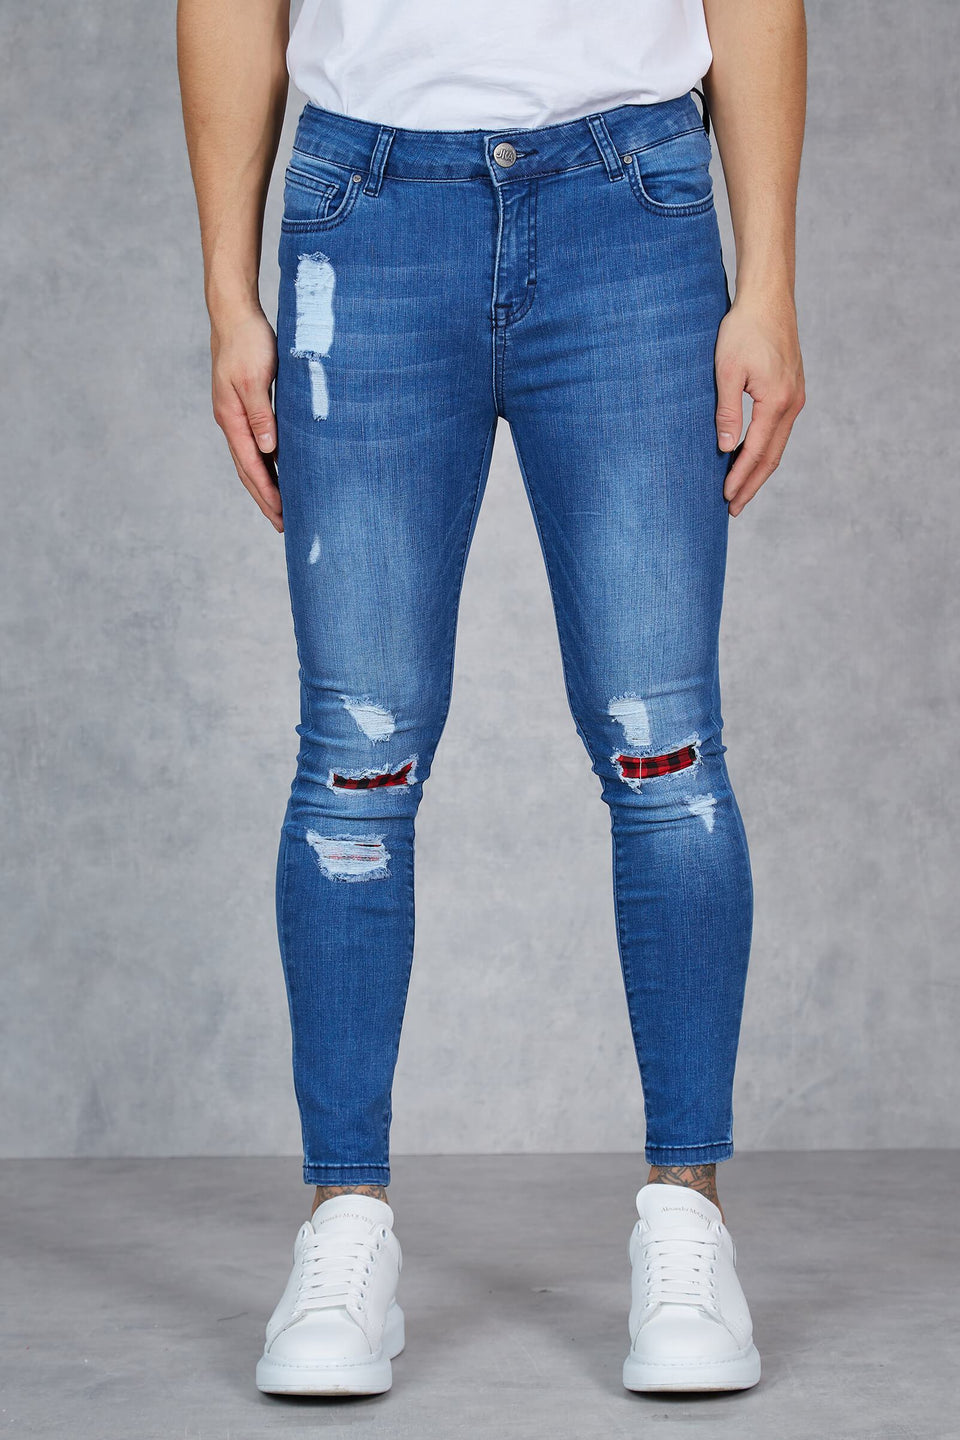 F1 - Grove Patchwork Distressed Super Spray On Skinny Jeans - Blue